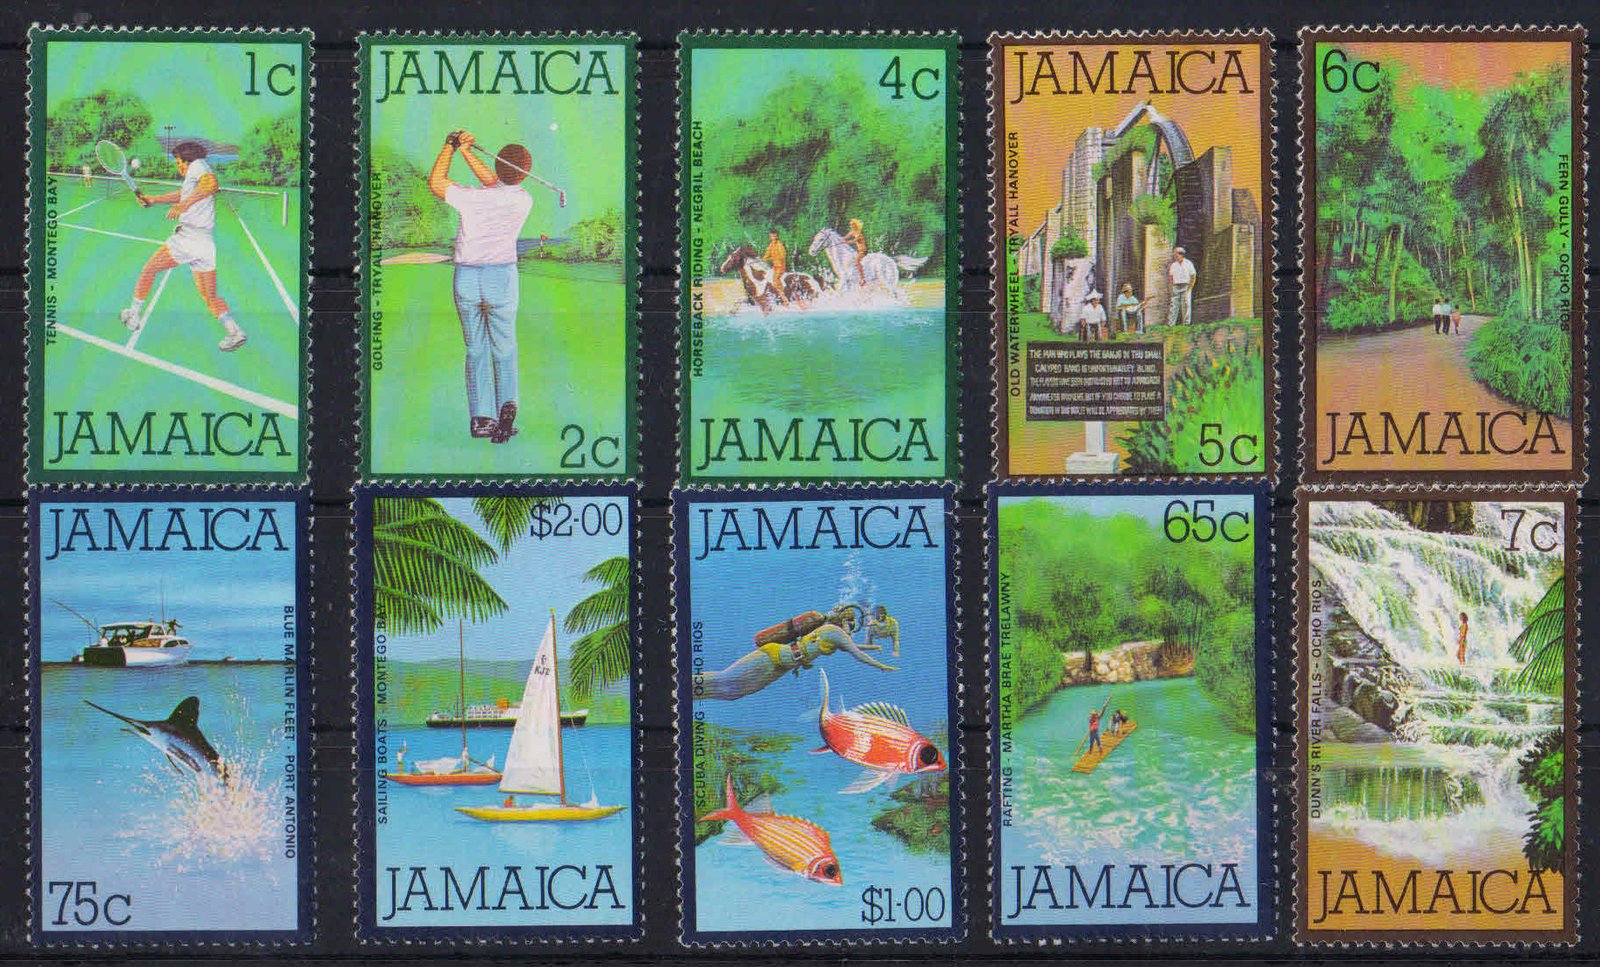 JAMAICA 1979-Pictorial Thematic Stamps-Tennis, Golf, River Falls, Diving & Sailing Boats, Set of 10, MNH, S.G. 461-476-Cat £ 17-